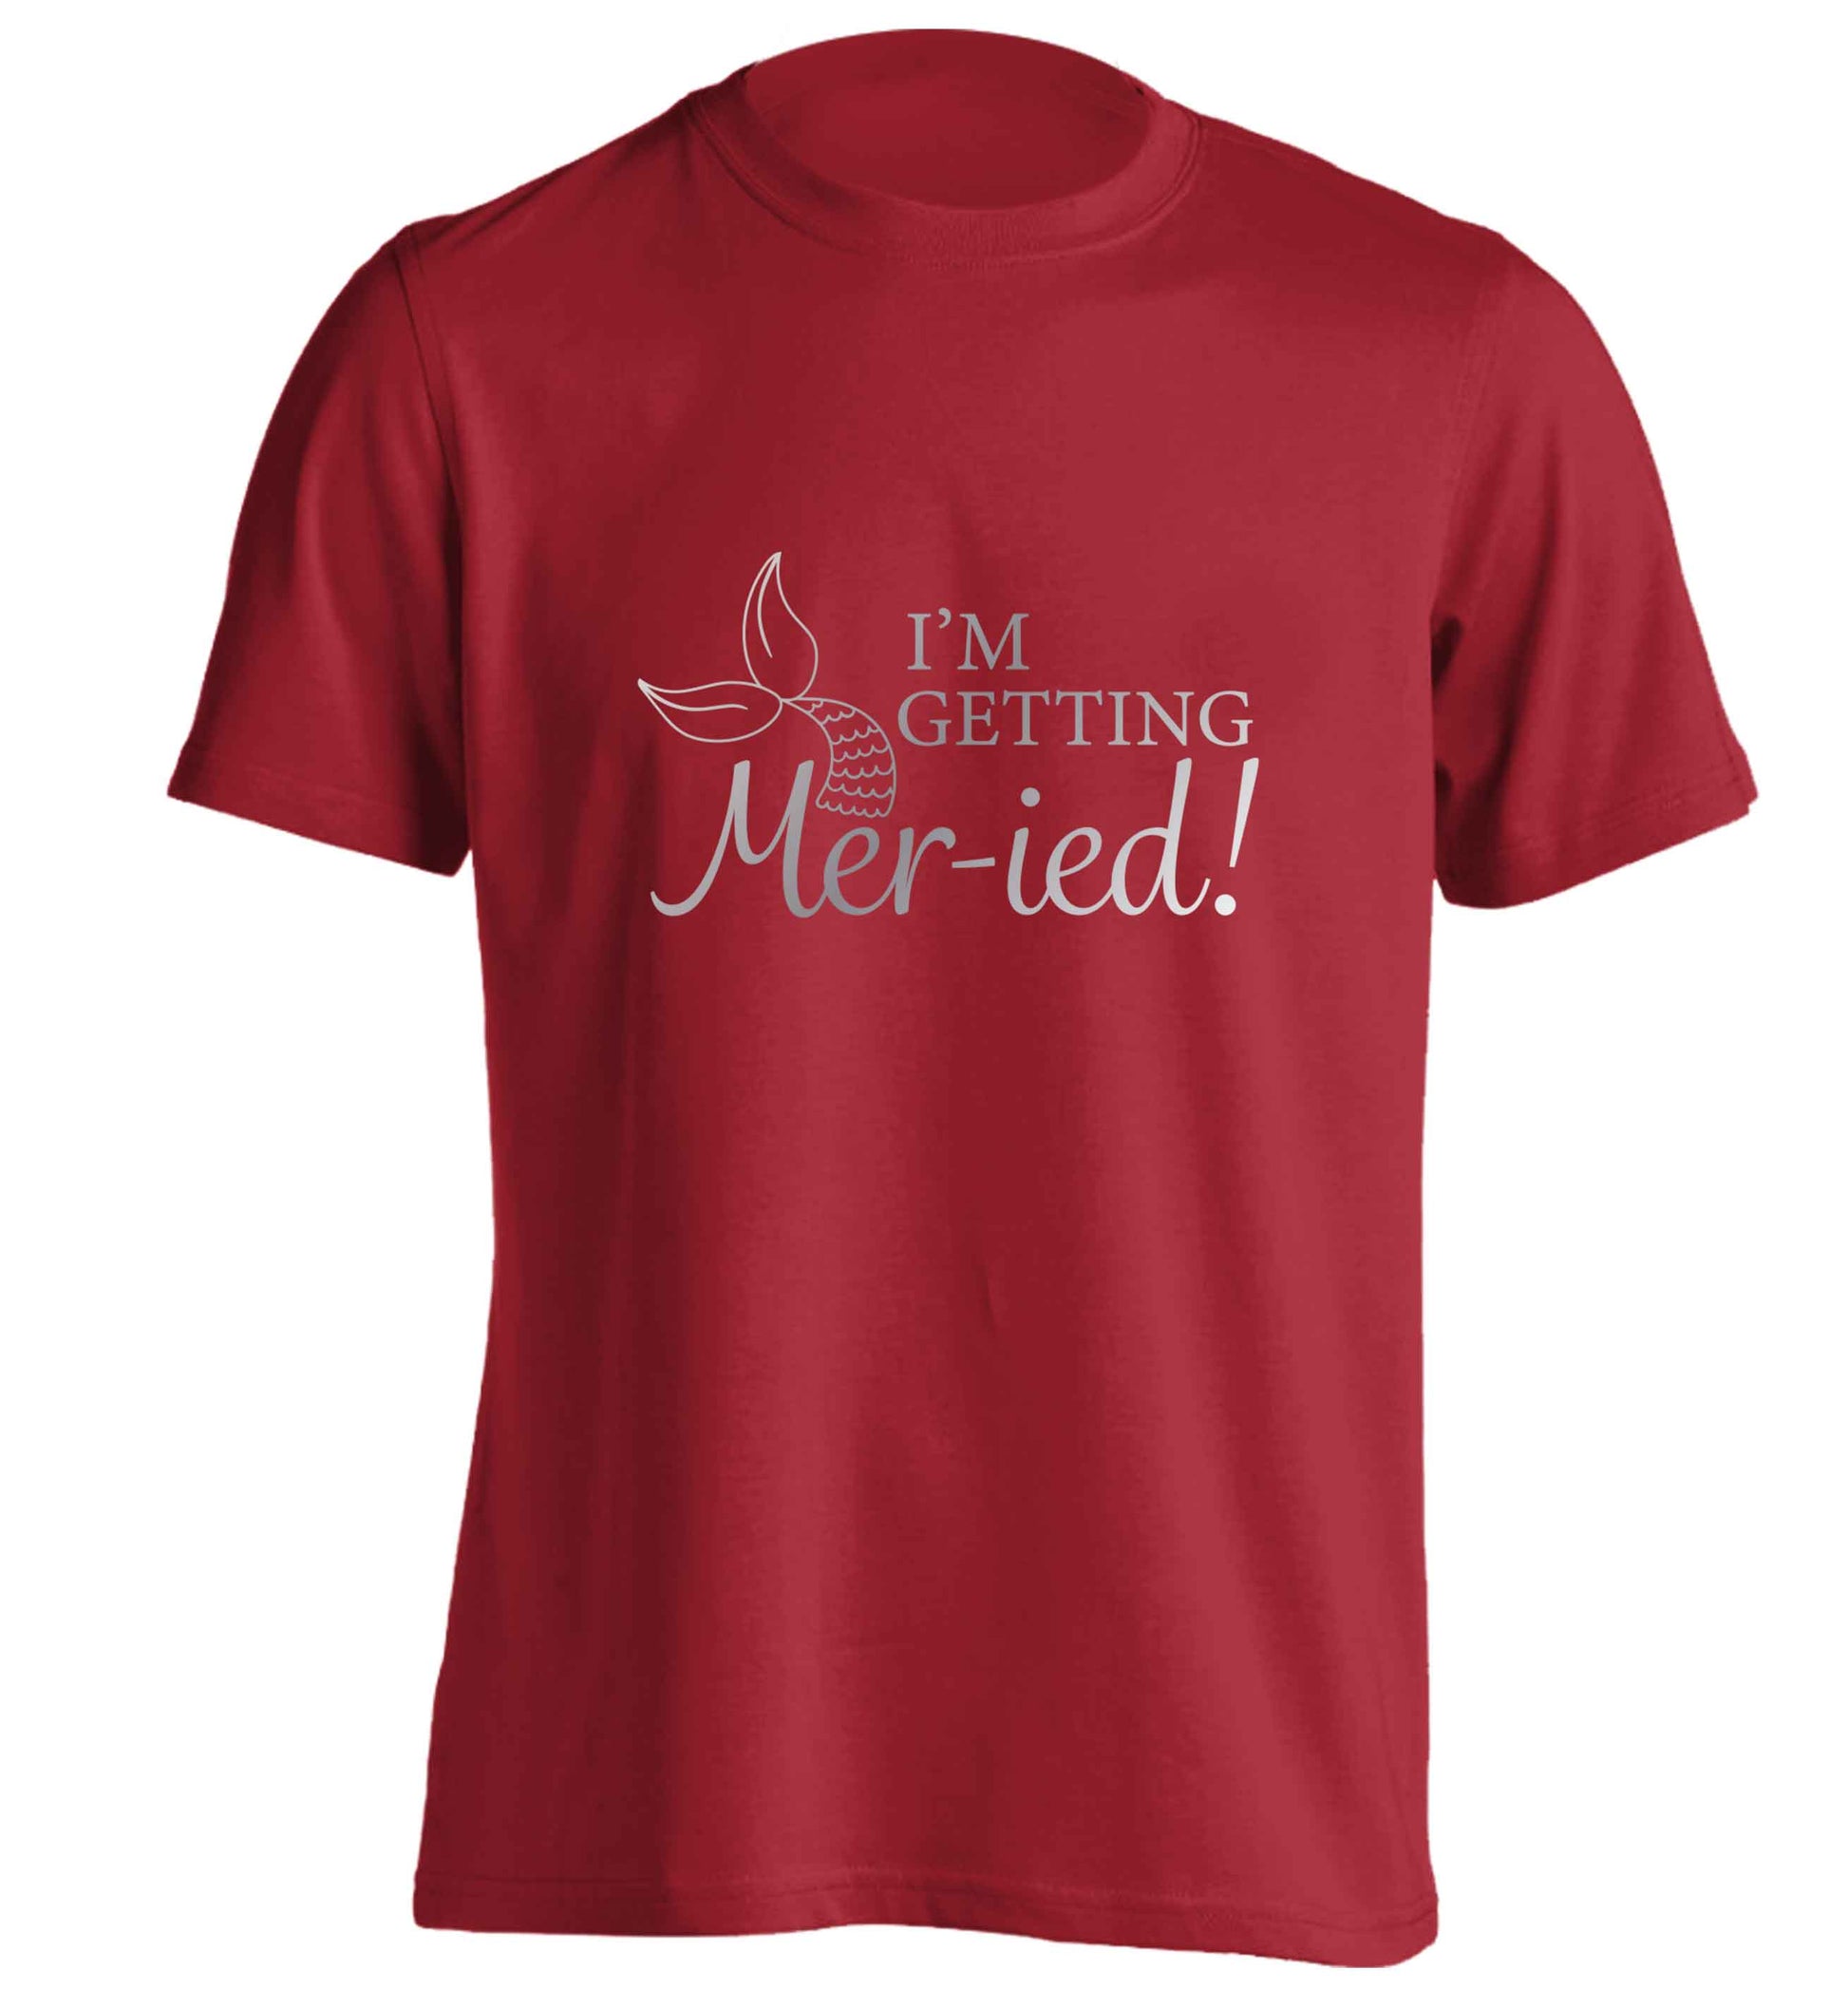 Personalised wedding thank you's Mr and Mrs wedding and date! Ideal wedding favours! adults unisex red Tshirt 2XL